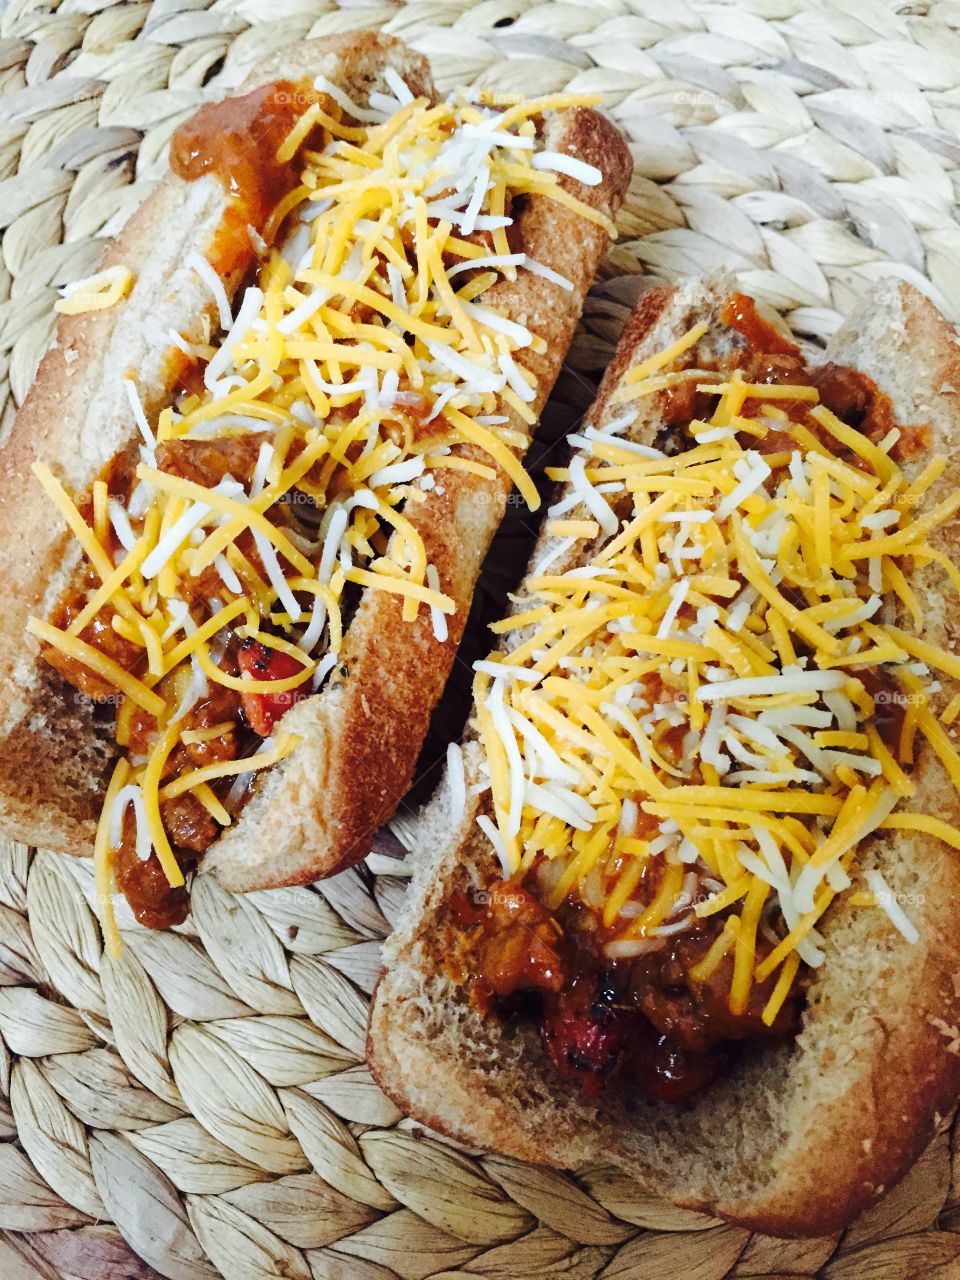 Hot Dogs!. Chili cheese hot dogs 